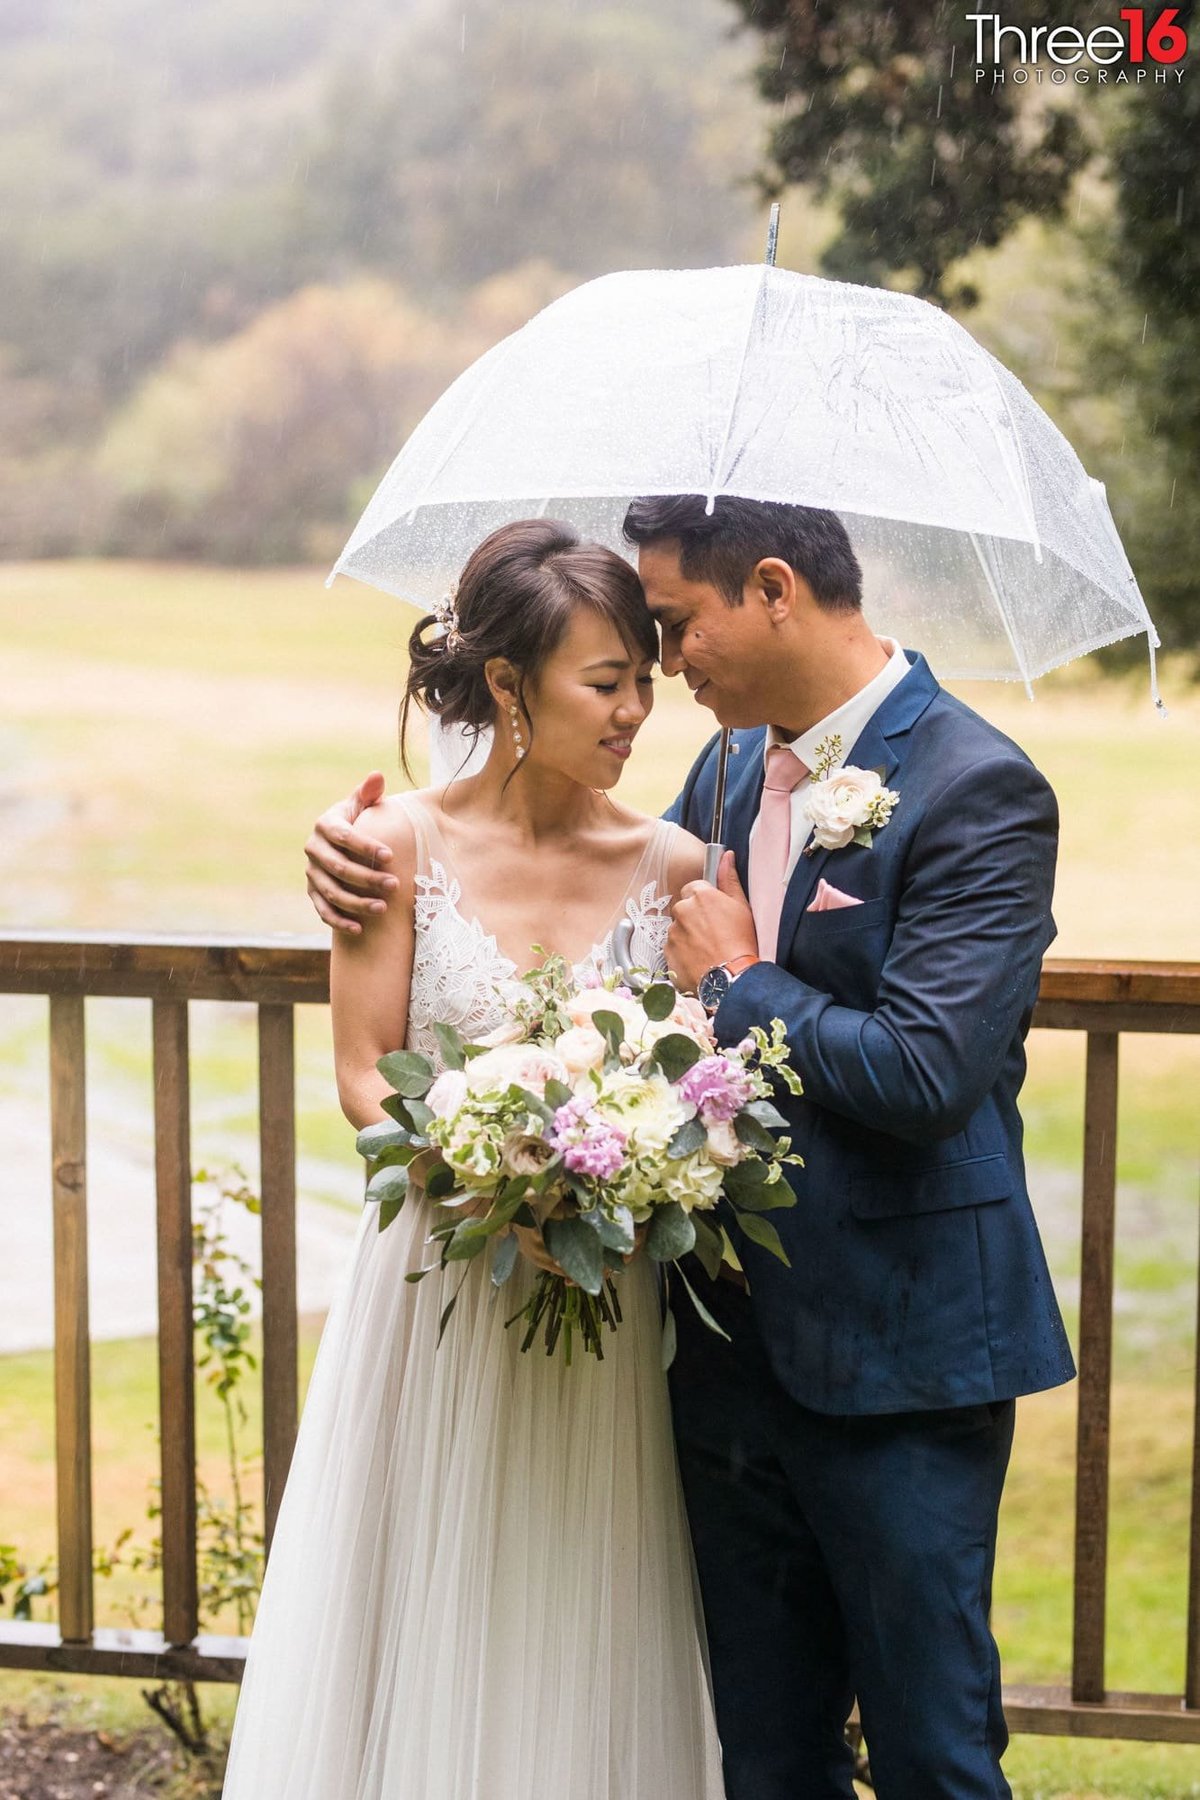 Bride and Groom share a quiet moment together under an umbrella due to rain